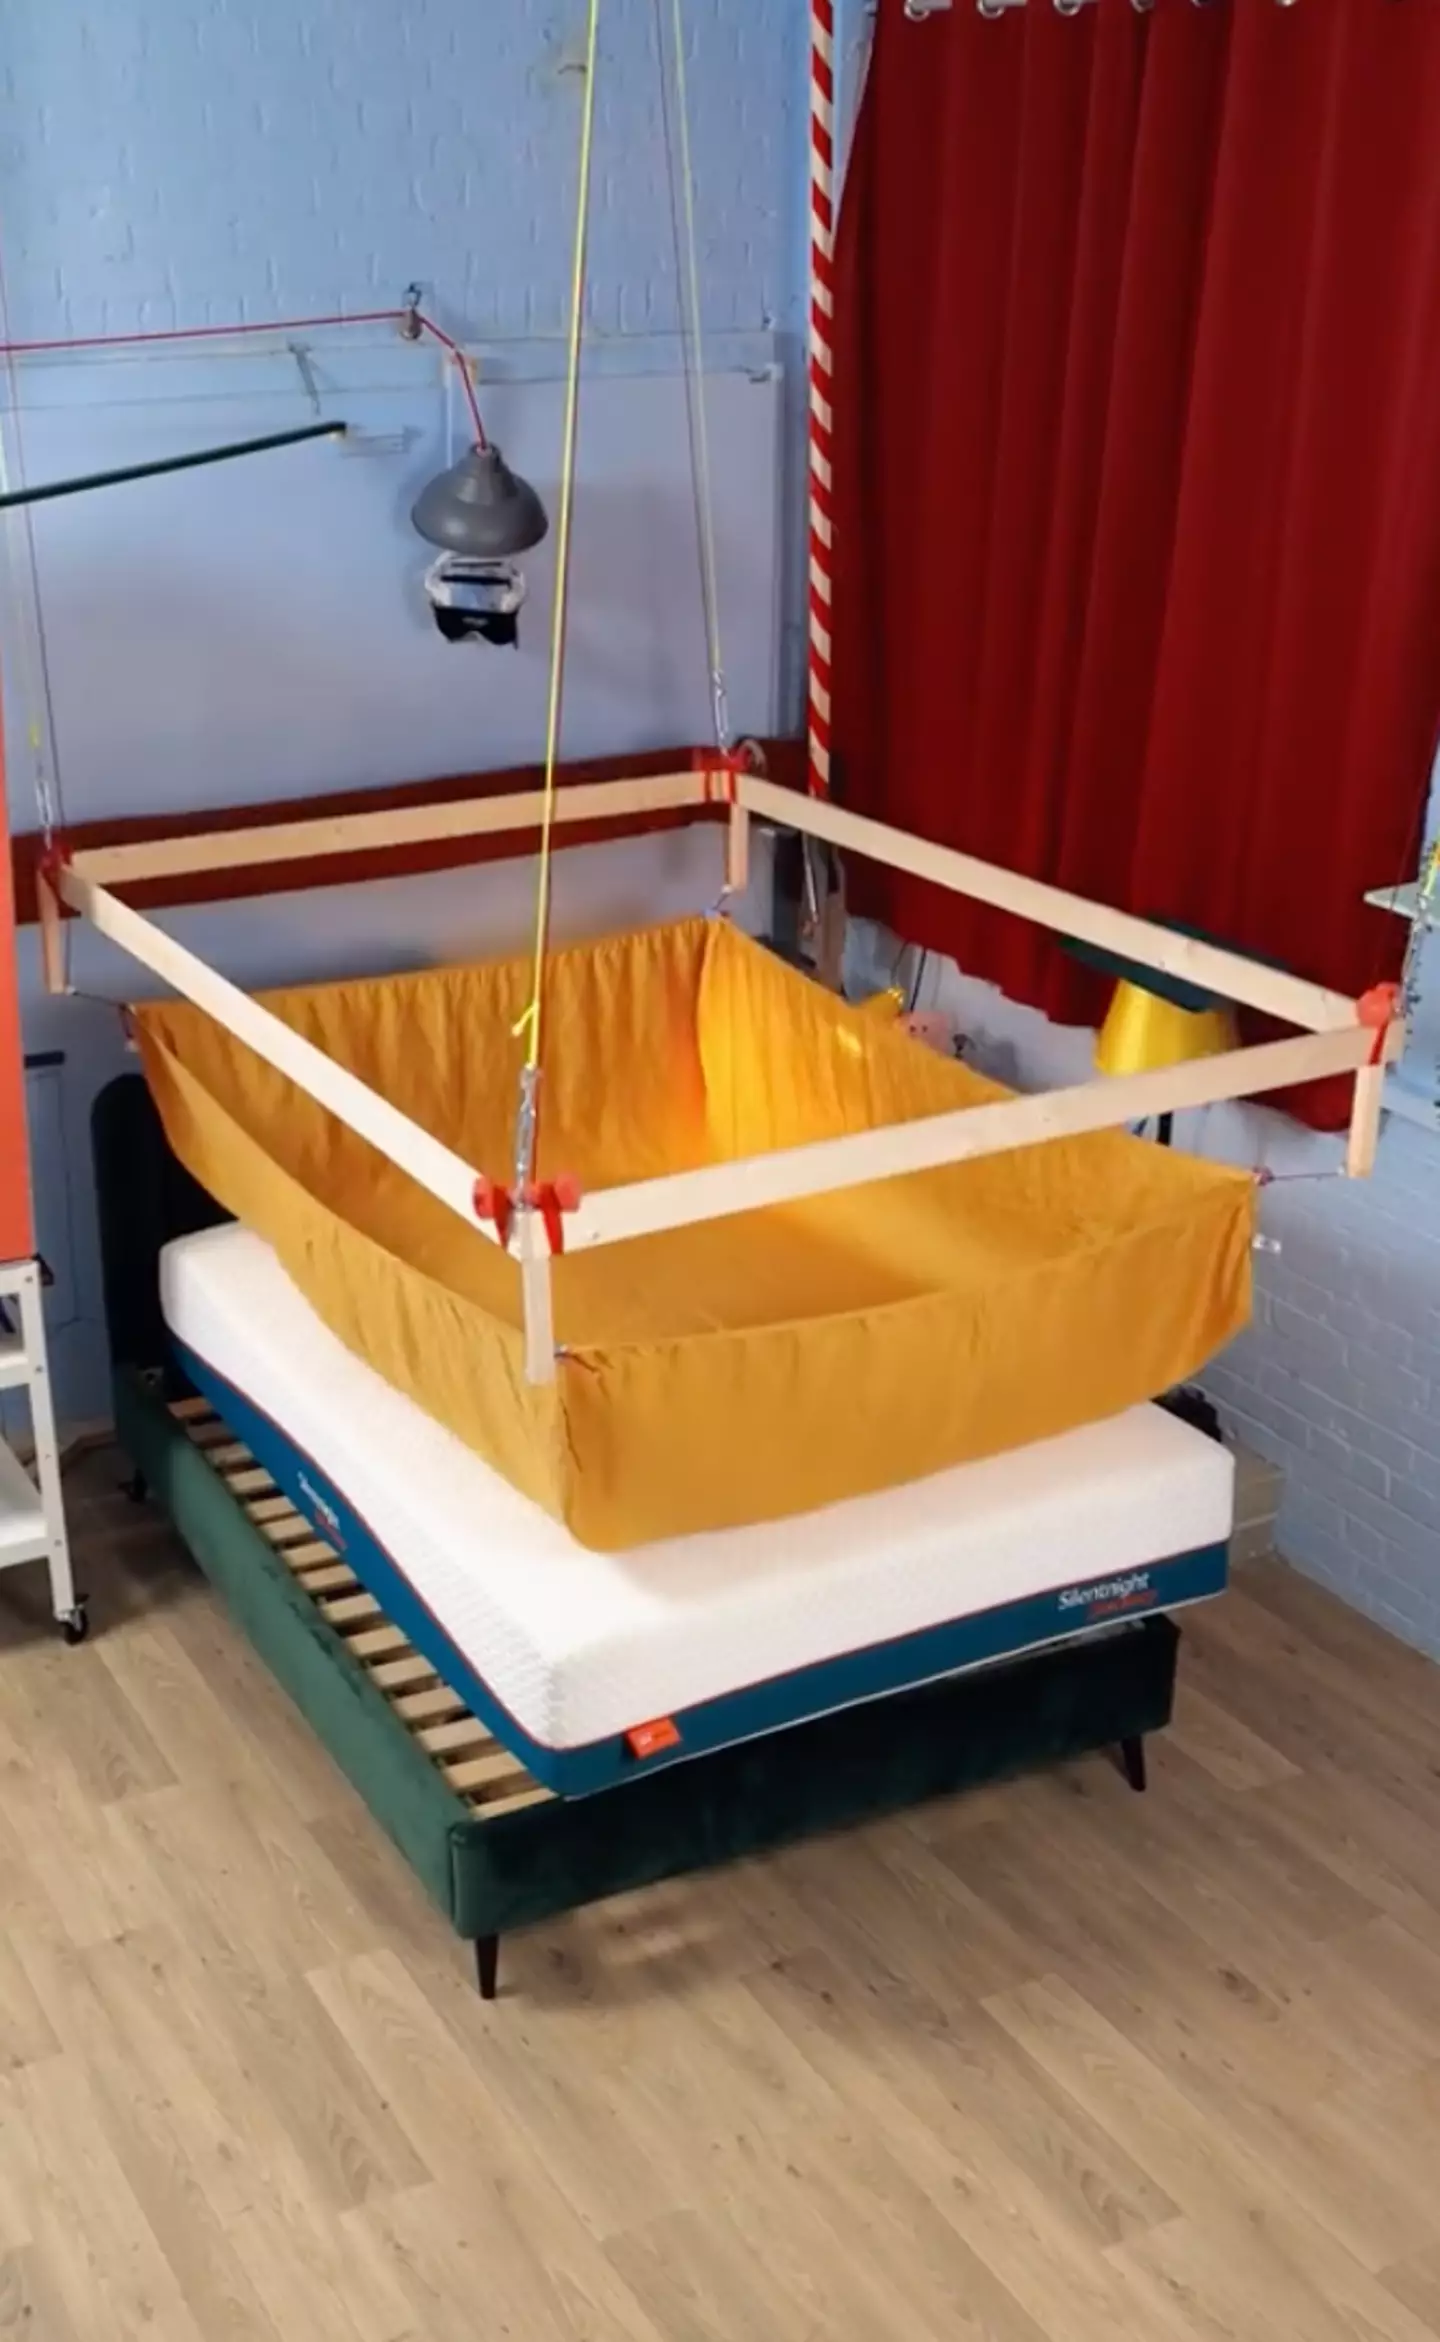 An inventor's 'bed-making' machine has gone viral across social media.